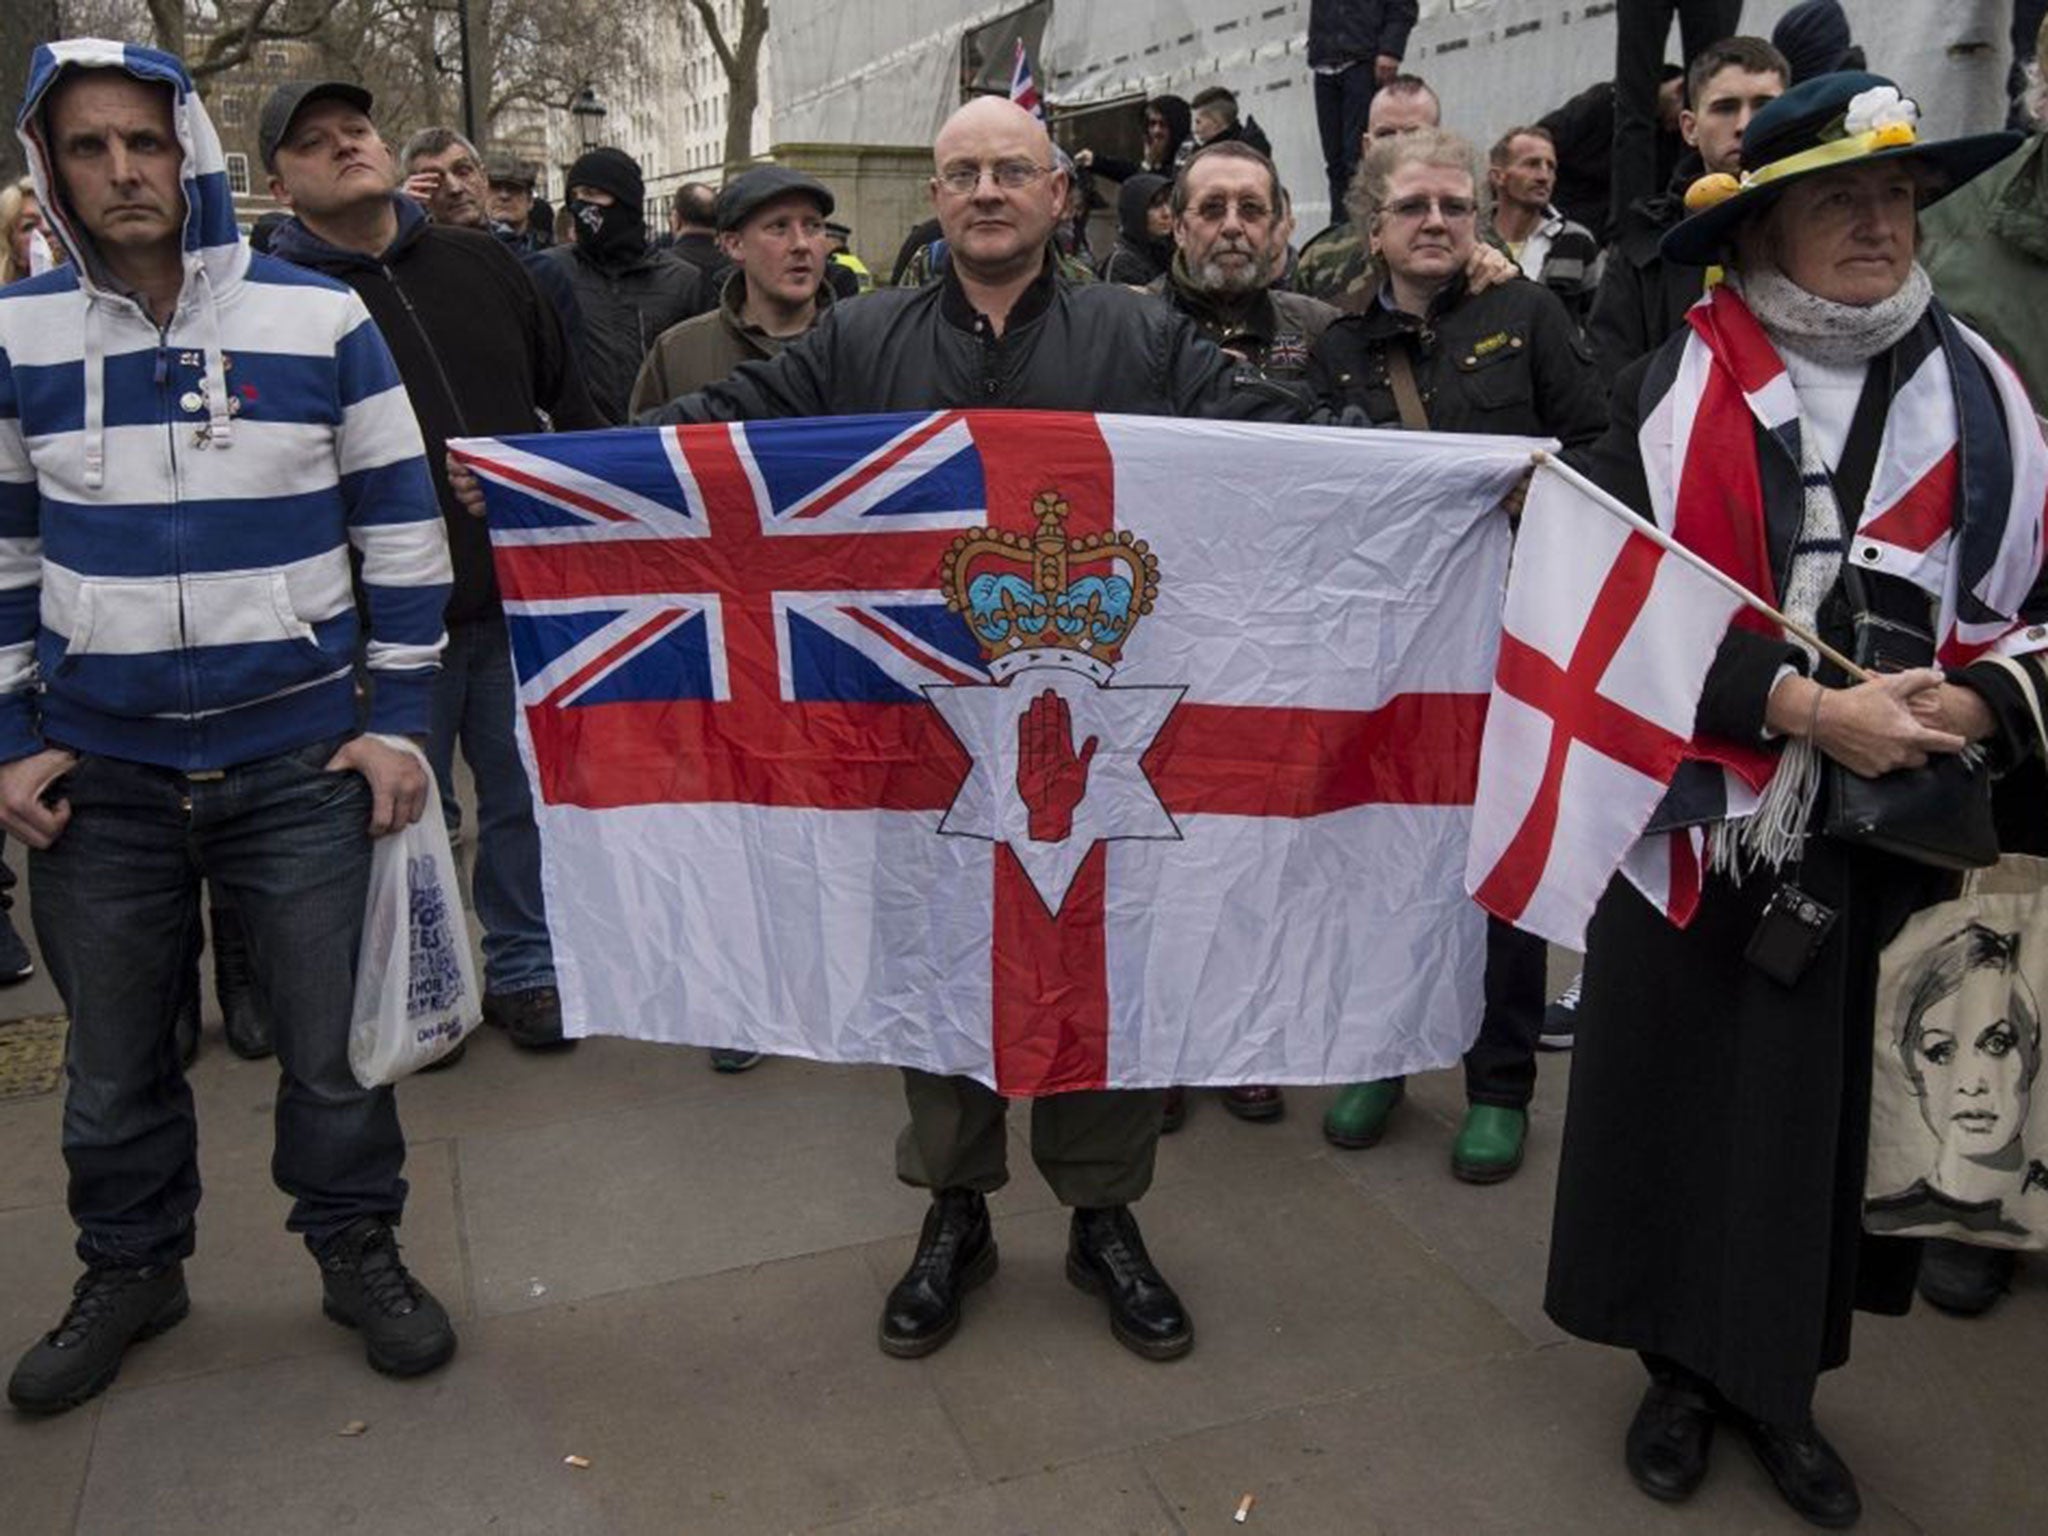 Activists from the British off-shoot of the Pegida during a rally on Whitehall, London, on 4 April